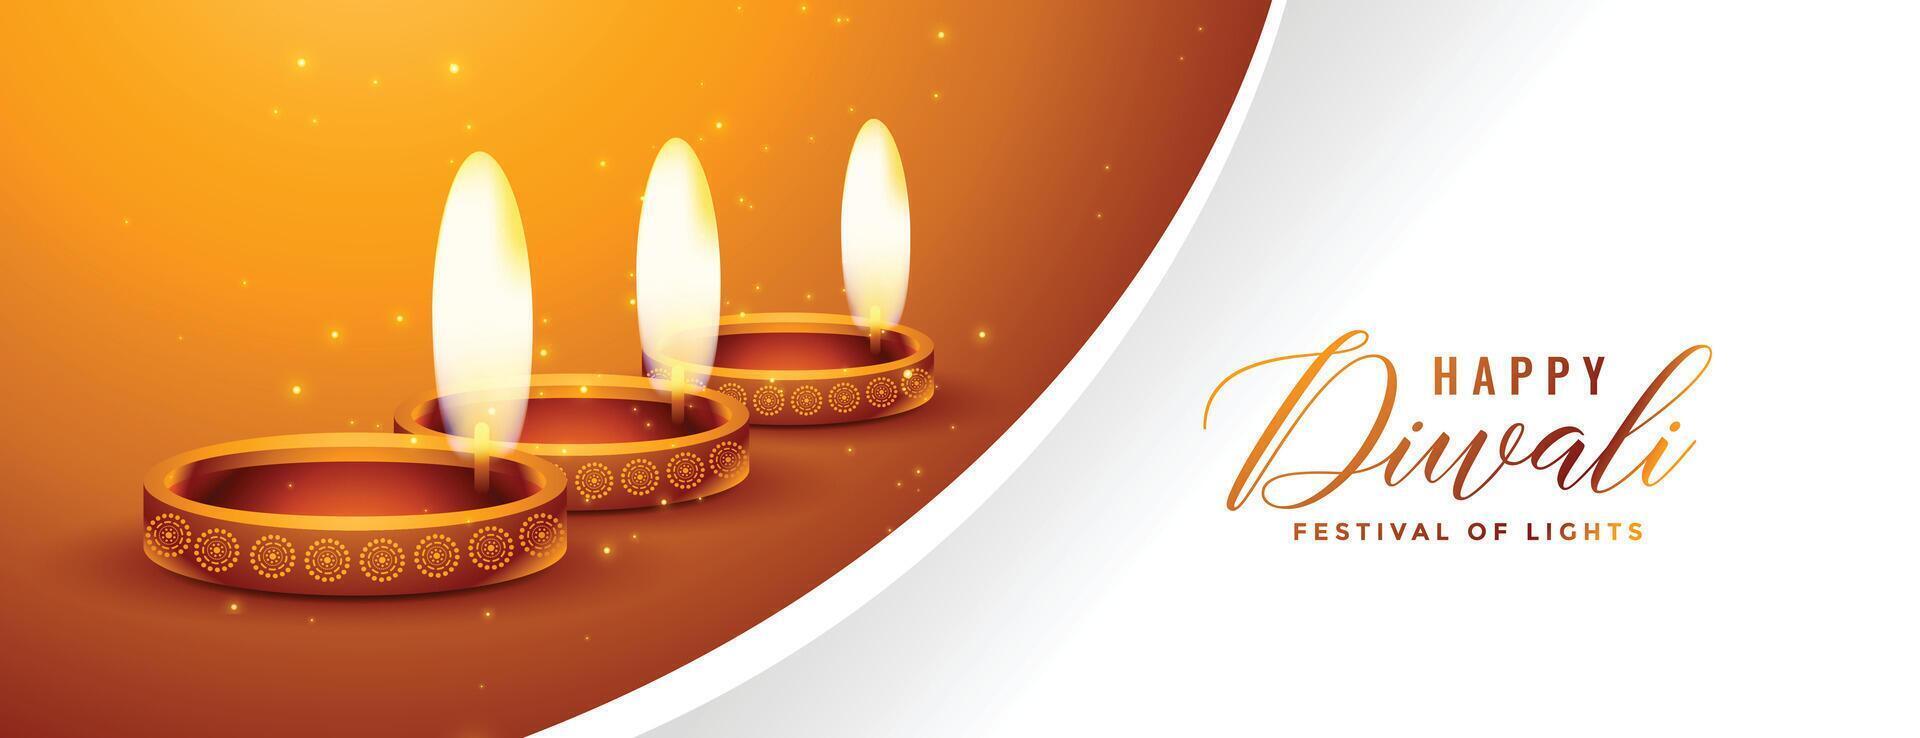 lovely happy diwali gold and white banner design vector